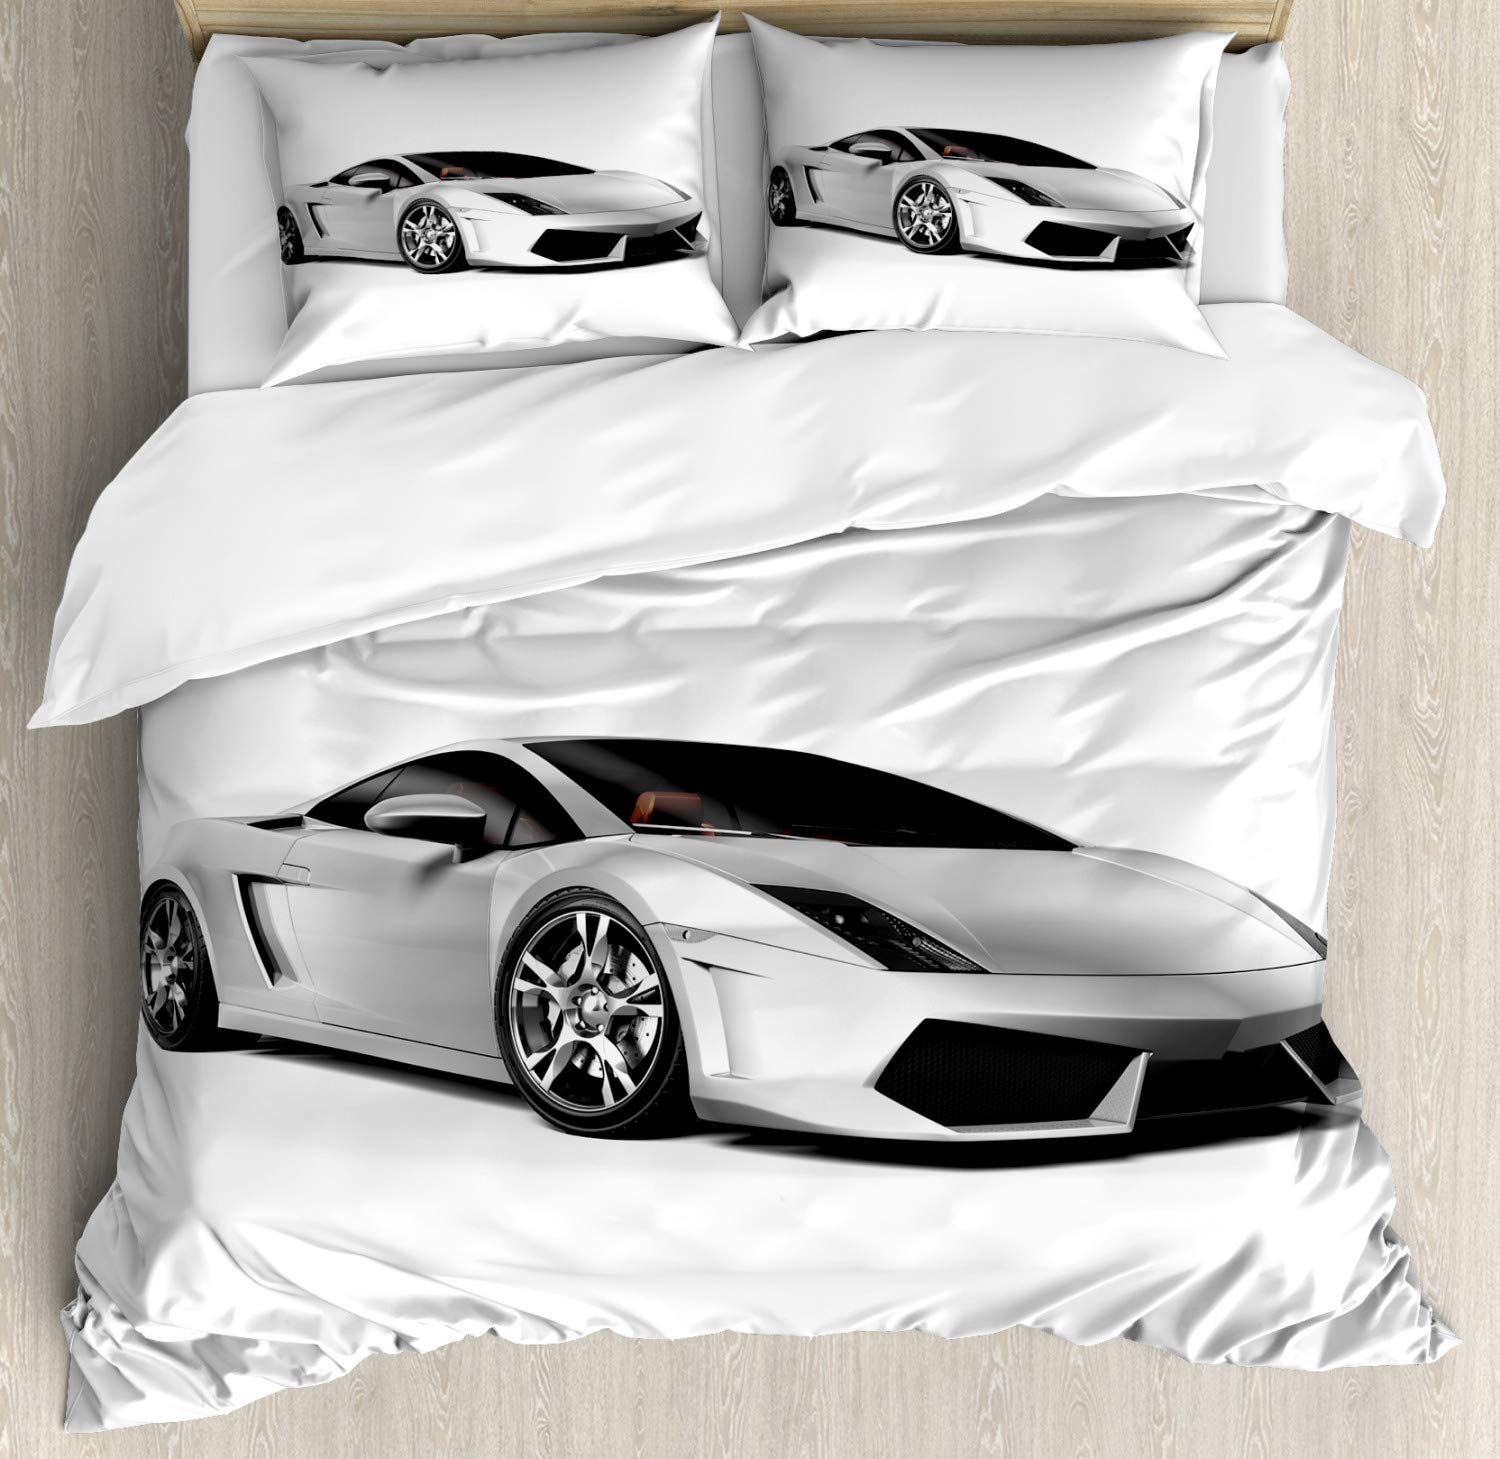 Lunarable Cars Duvet Cover Set, Sports Car with Futuristic Inspired Wheels Reflection Design Print, Decorative 3 Piece Bedding Set with 2 Pillow Sh...